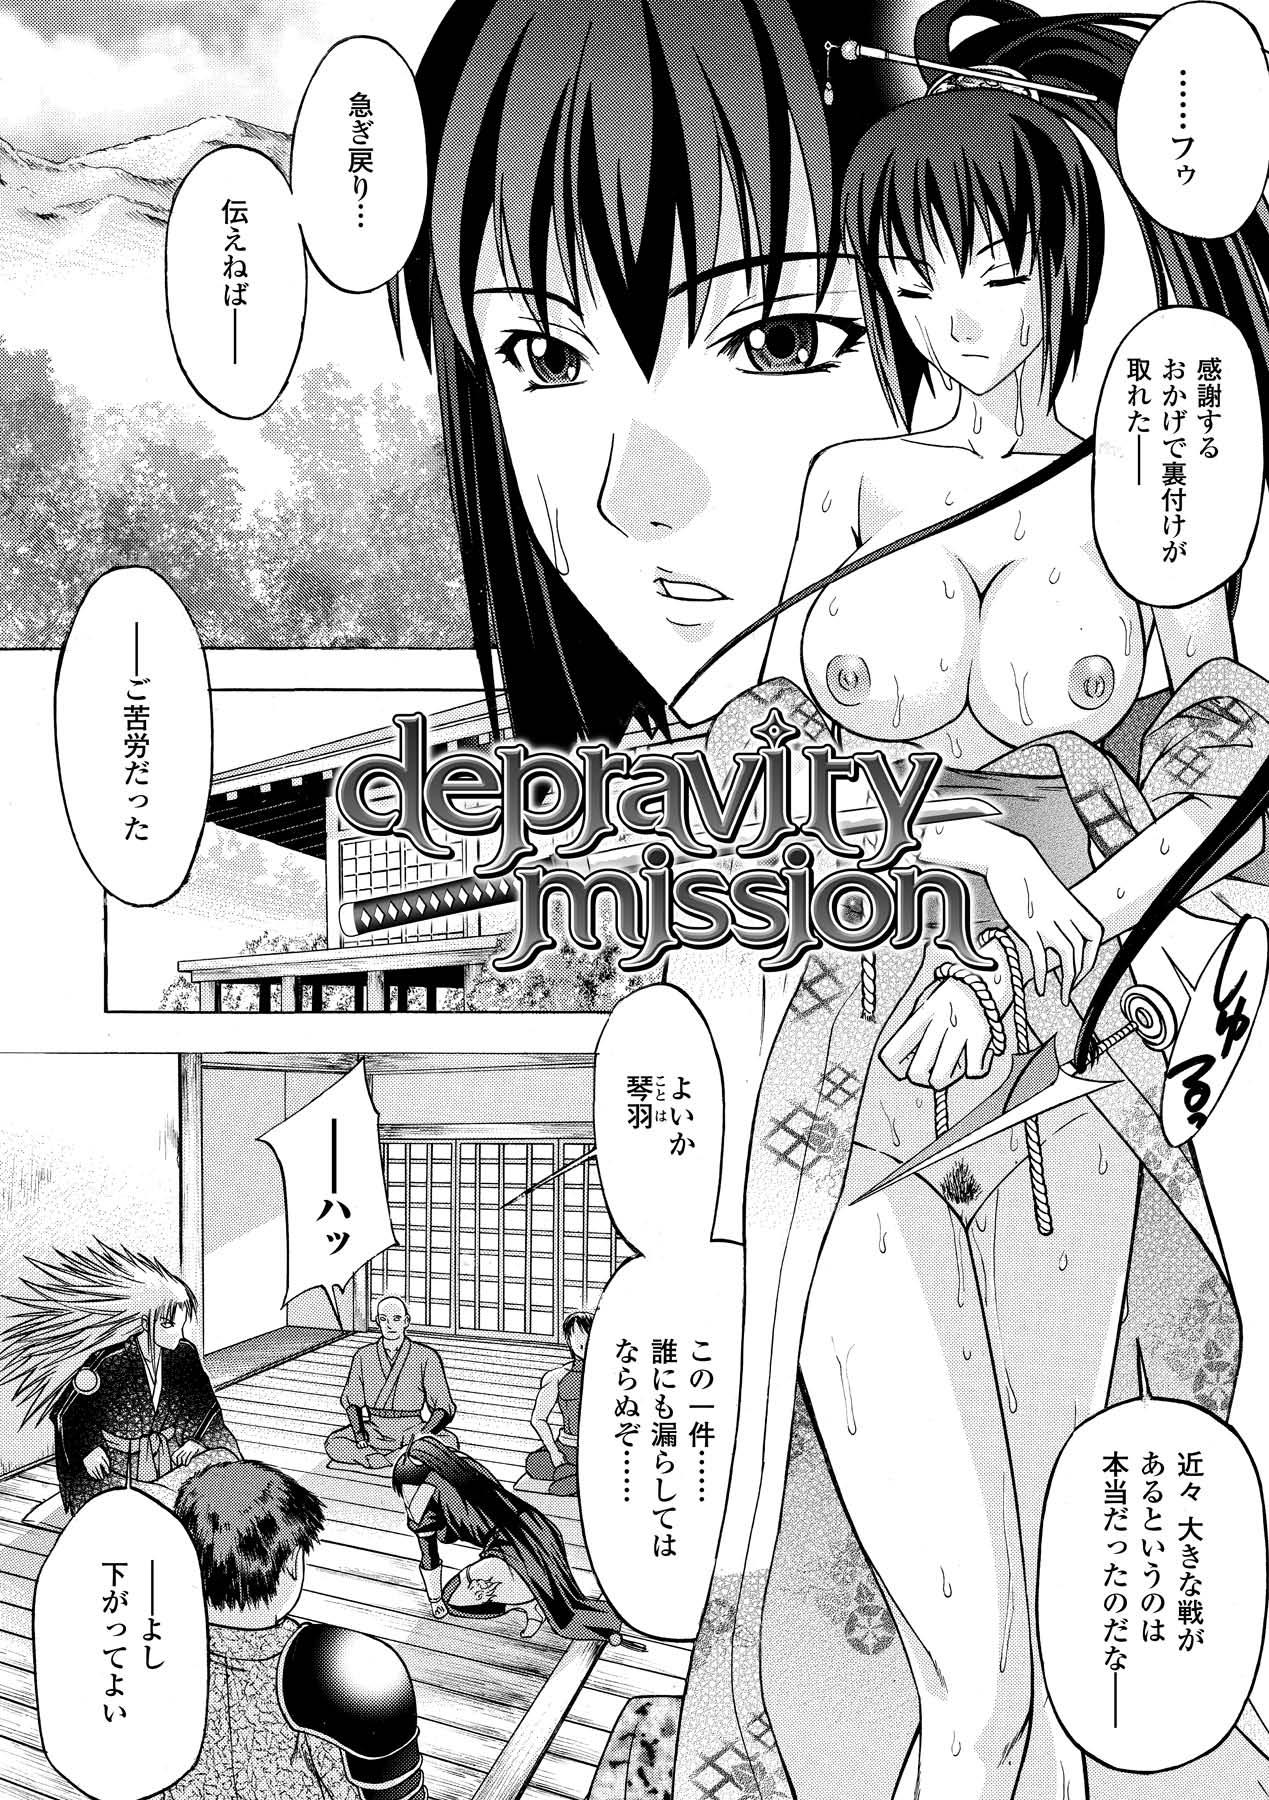 Shaved ECSTASY MISSION Japanese - Page 10